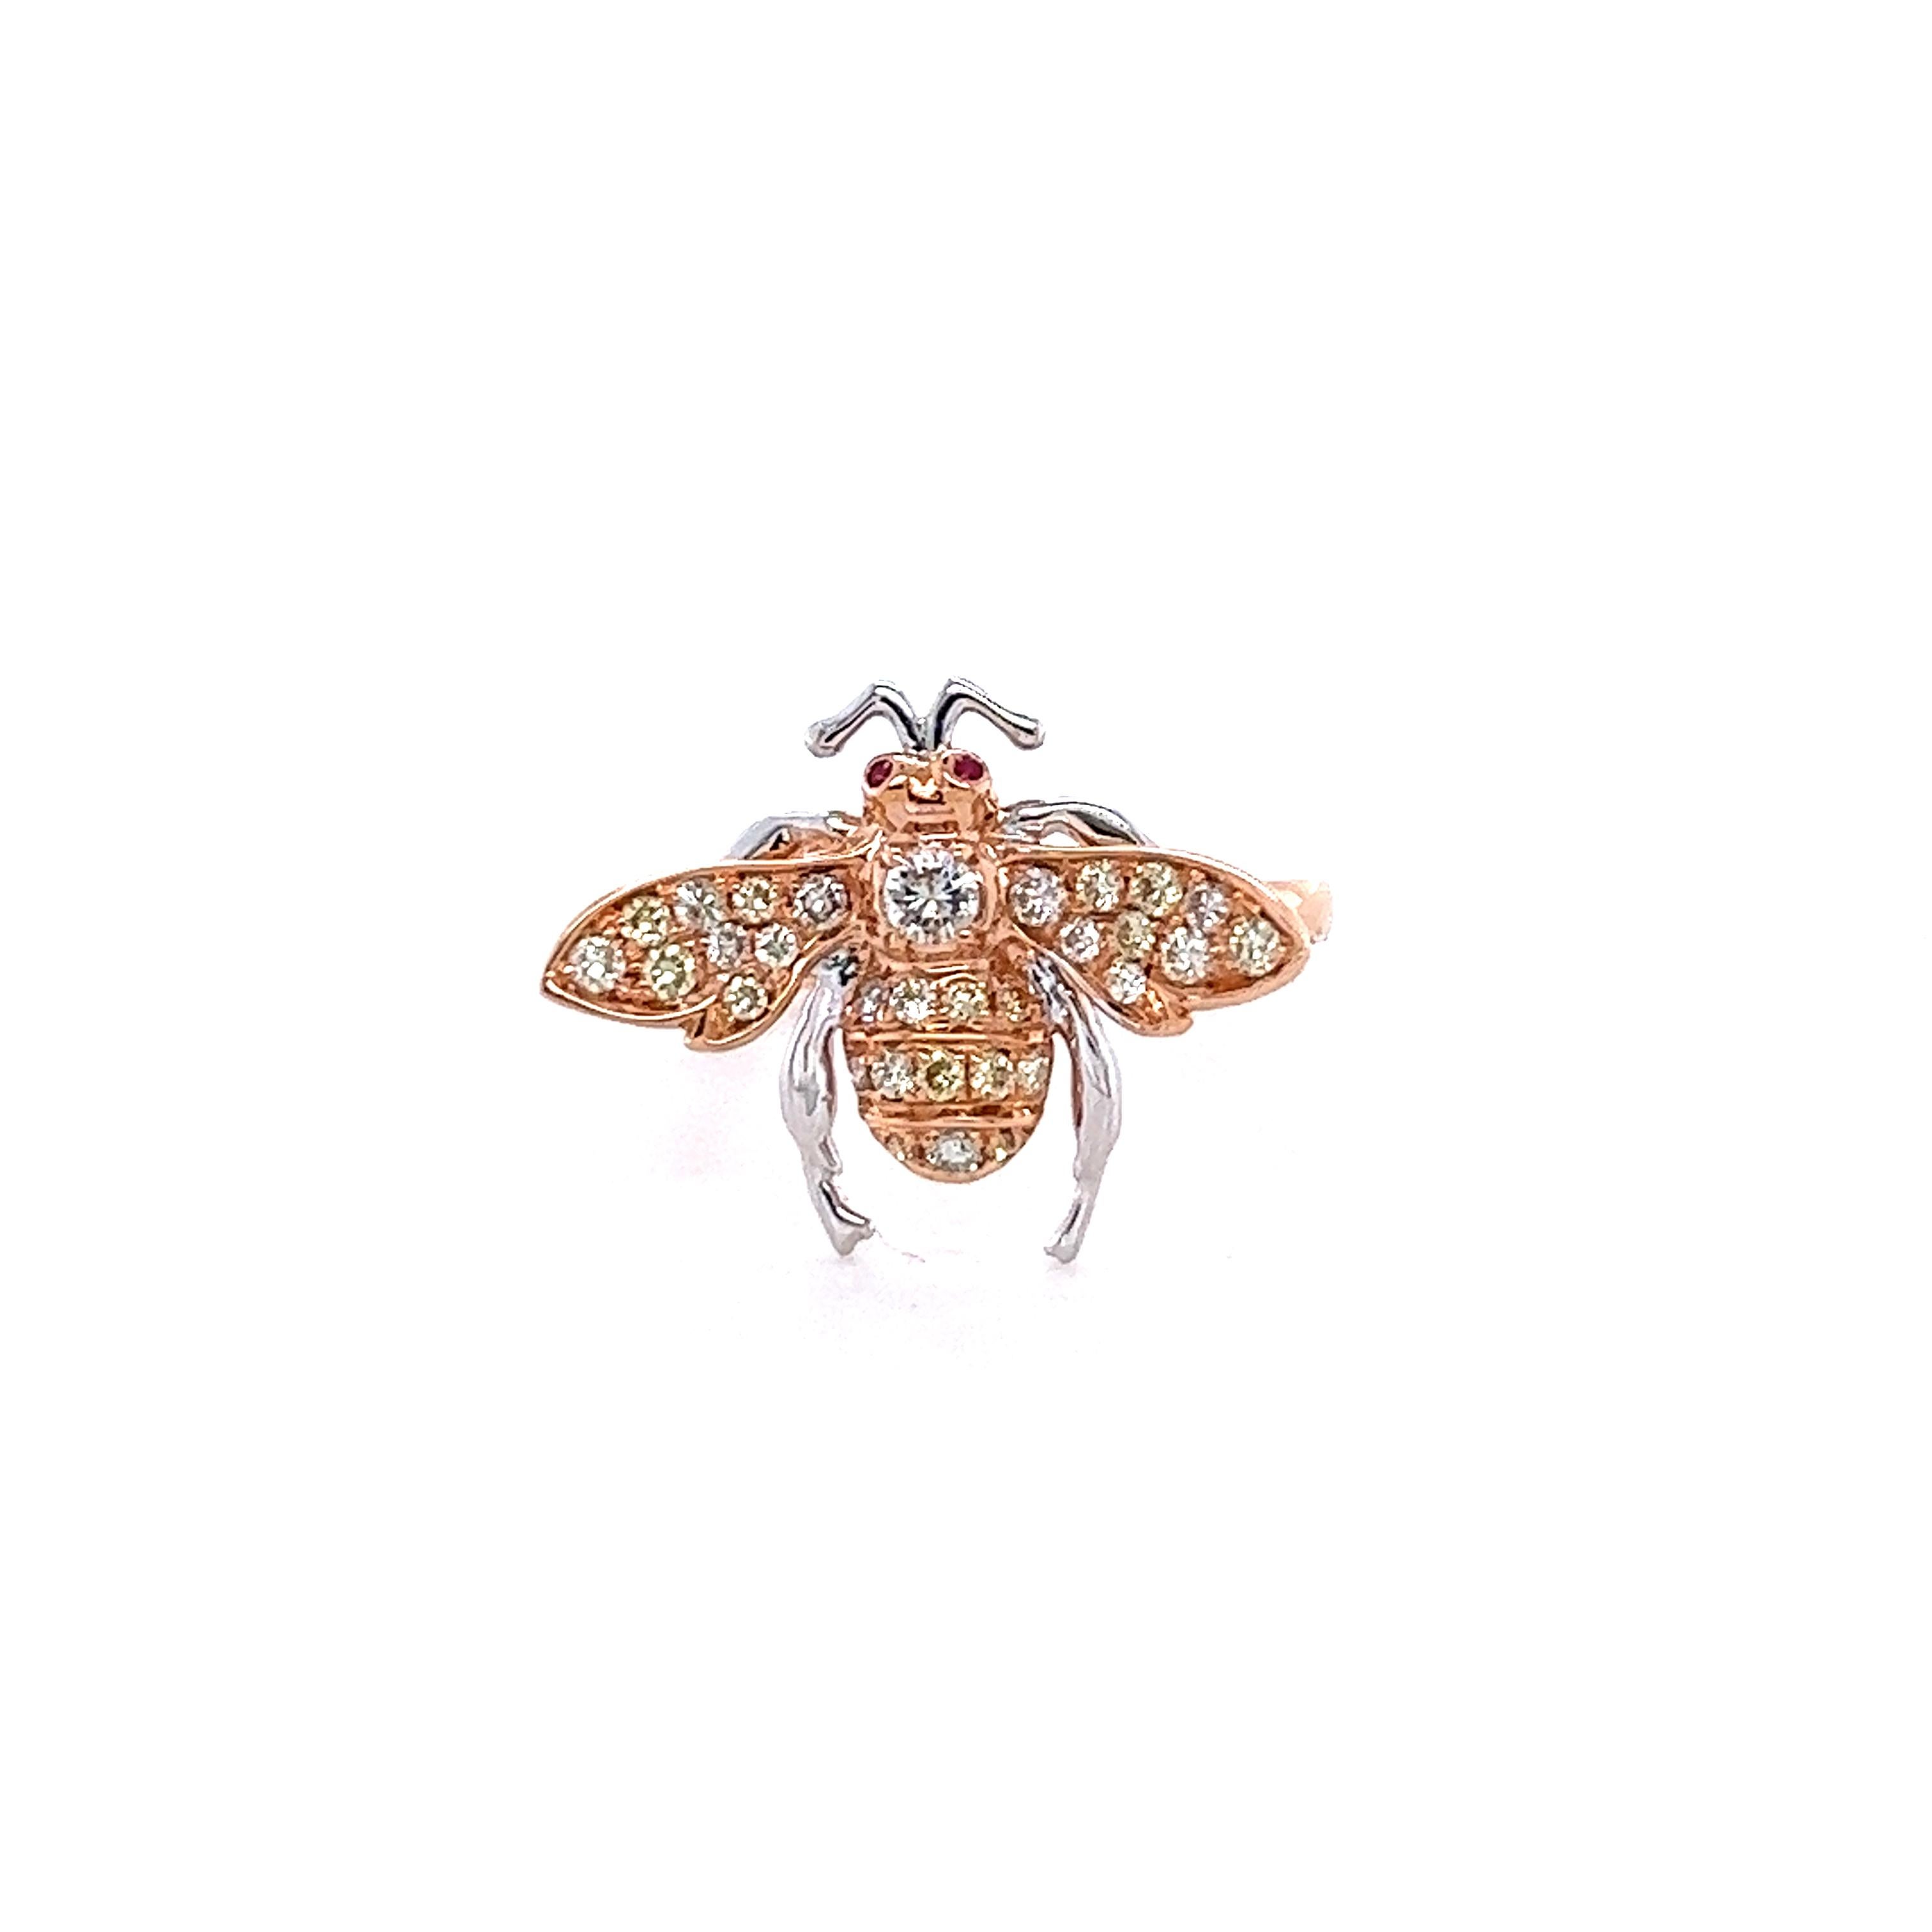 18 K Rose Gold Fancy Diamonds Rubies Bee Ring

31 Fancy Diamonds 0.39 CT
2 Rubies 0.01 CT
18 K Rose Gold 3.71 GM

Bees have a long history of being associated with luck, wealth and royalty. As such, they are often featured in jewellery designs. Bee